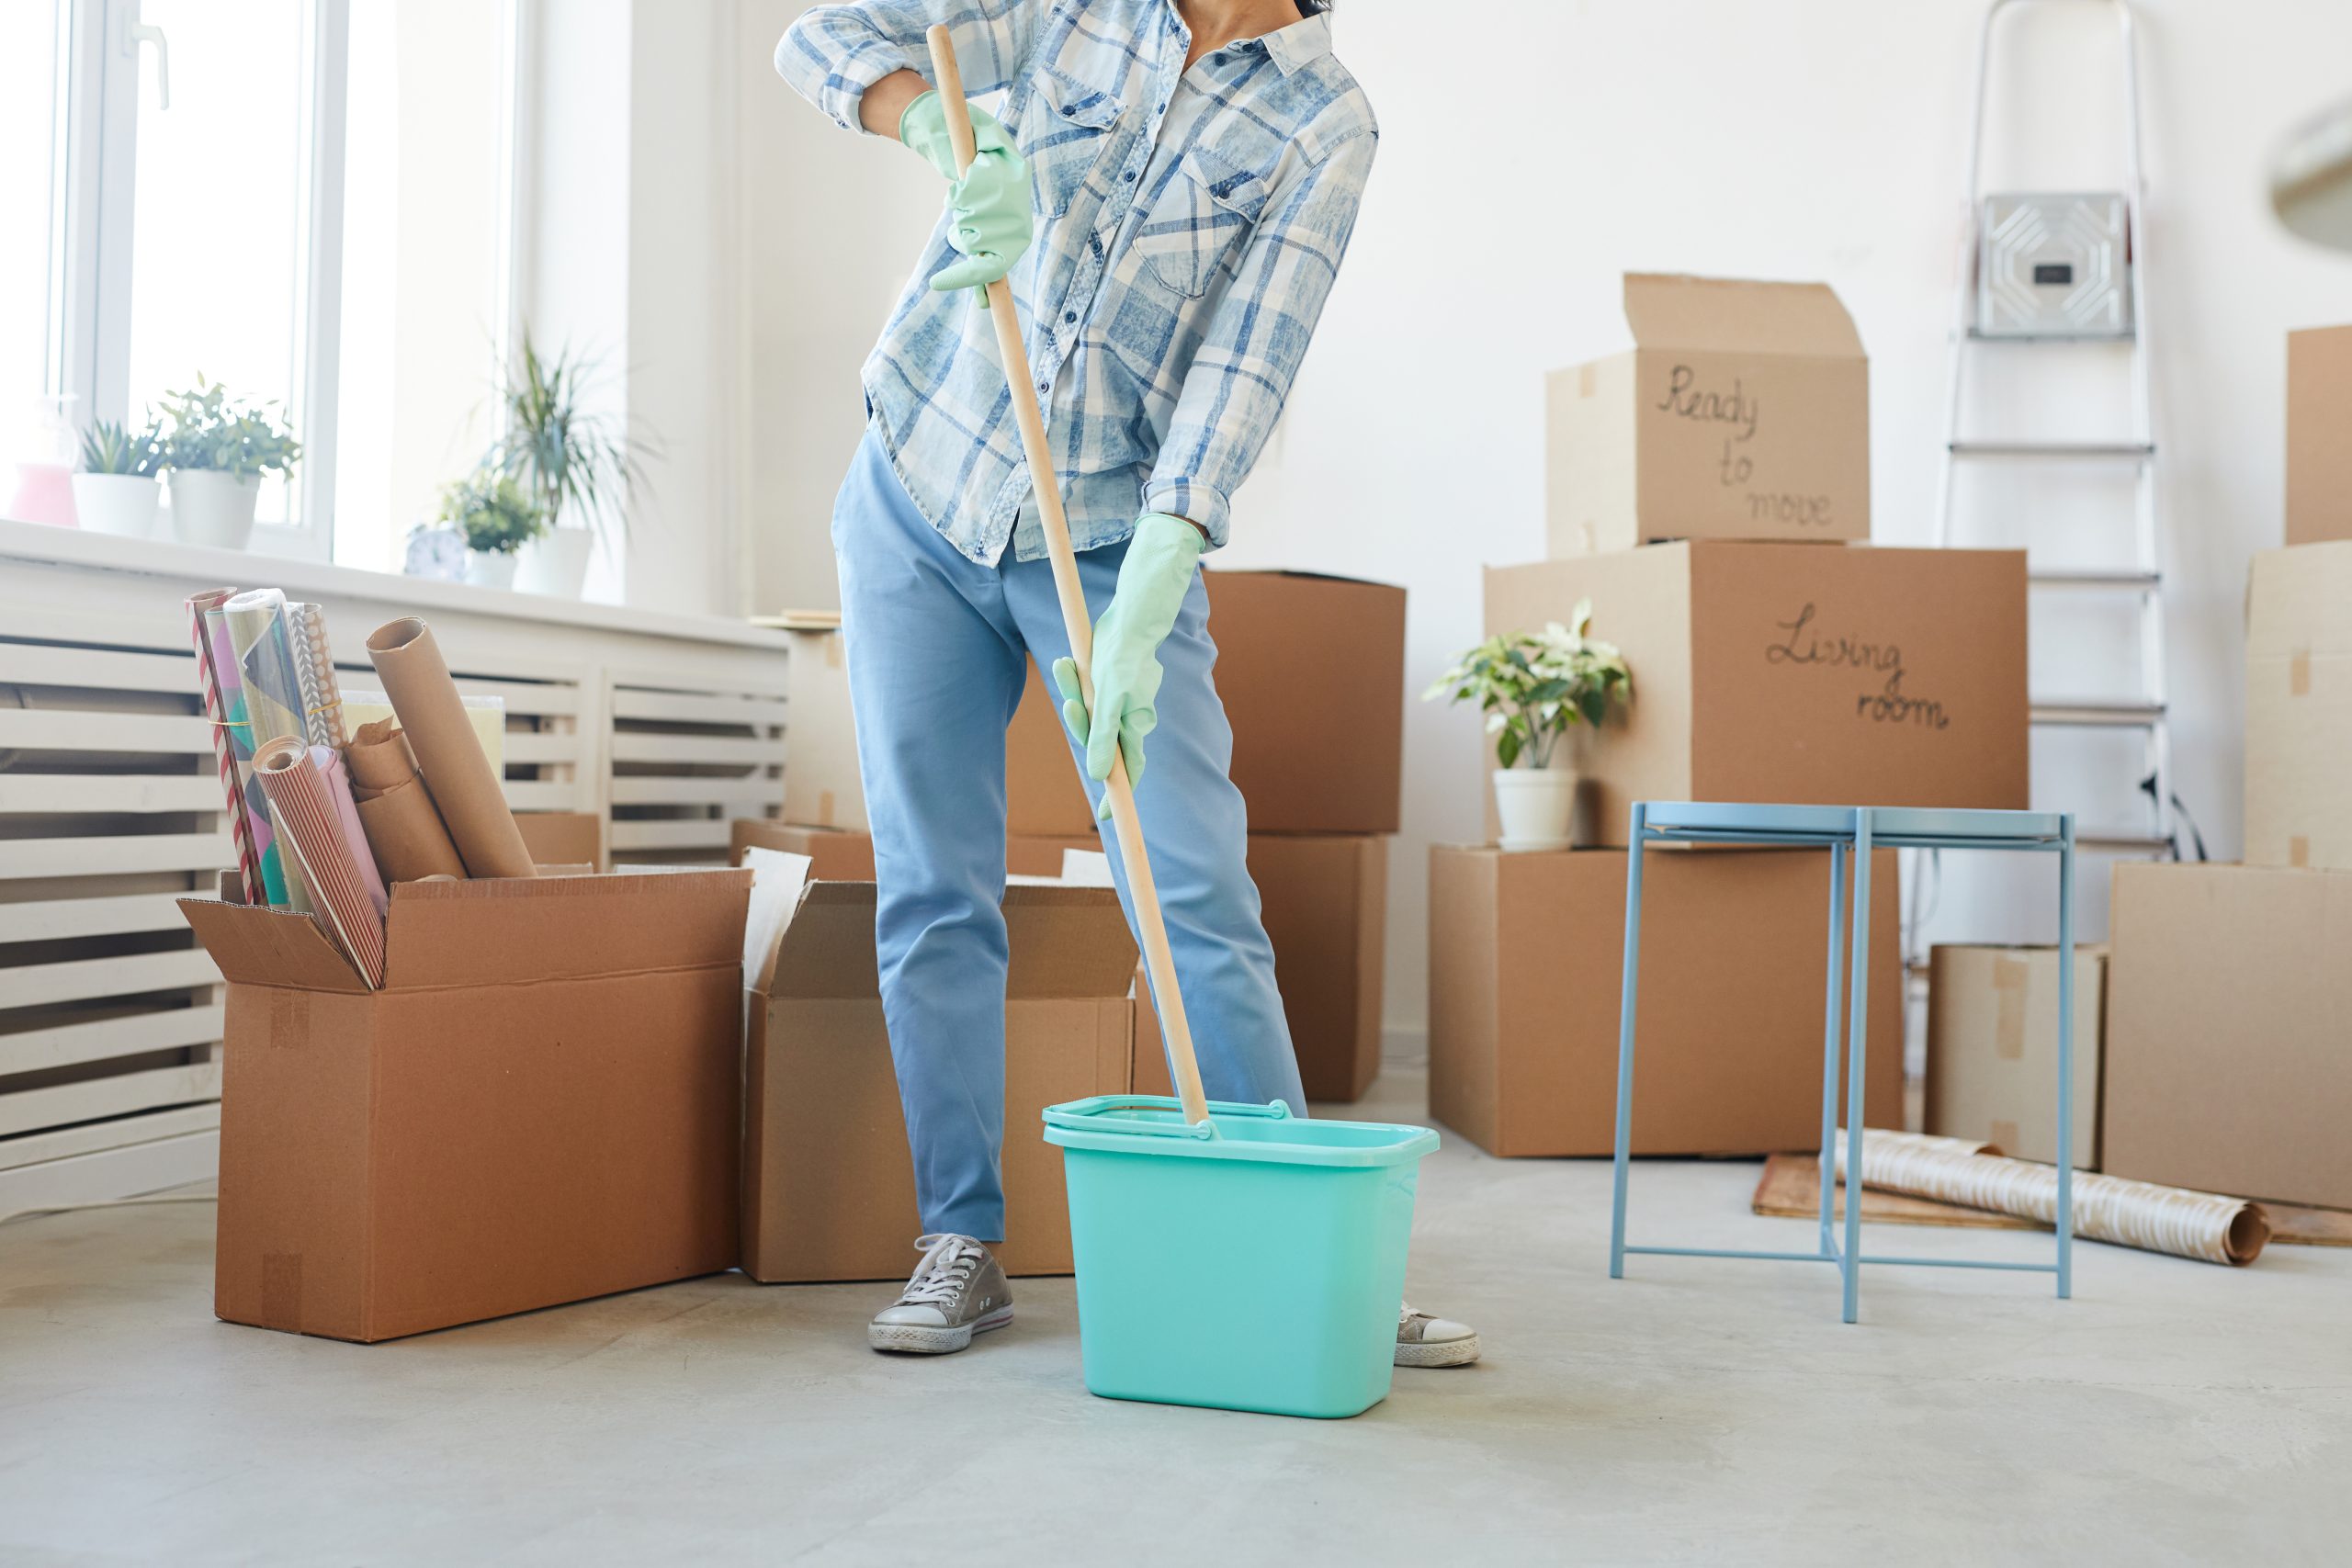 Why should I hire a move-out cleaner?